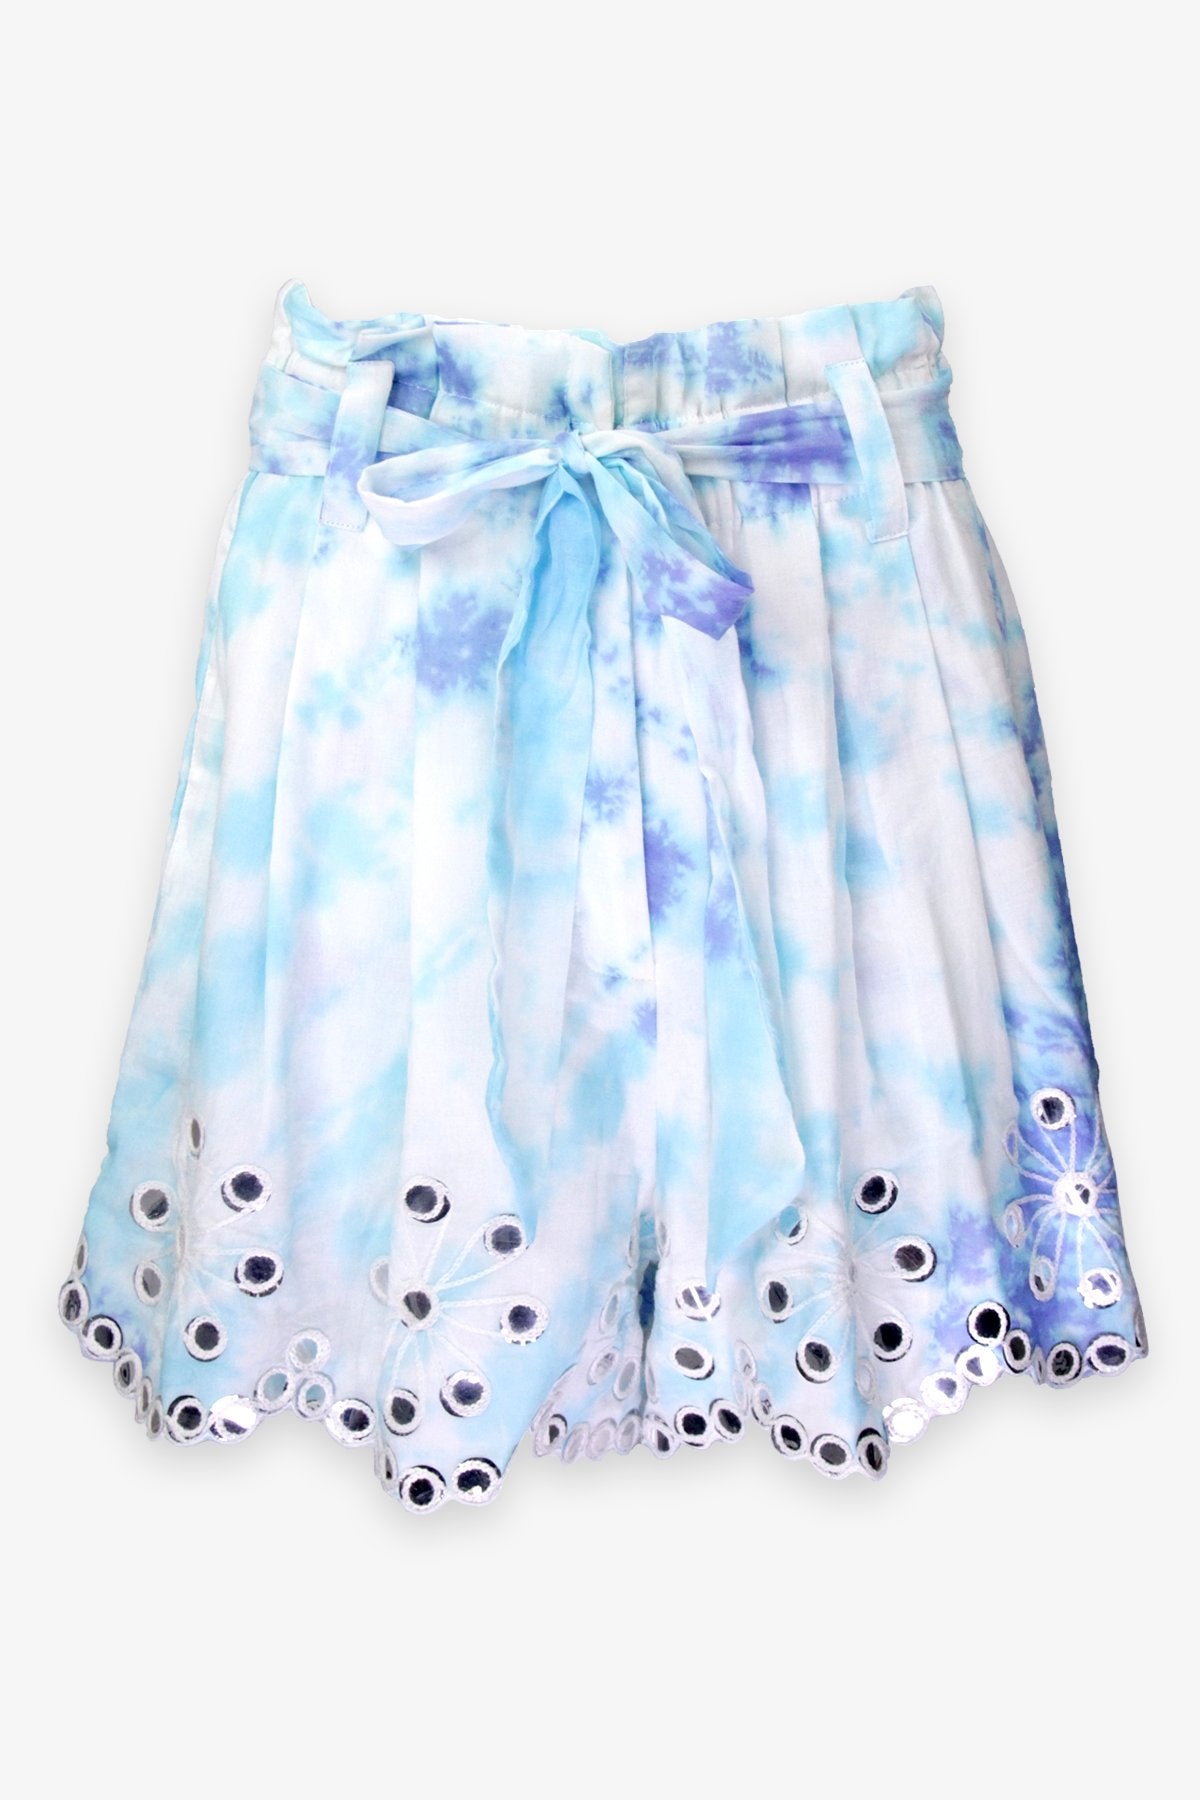 Spiral Tye Dye Shorts with Mirror Turquoise Blue - shop-olivia.com